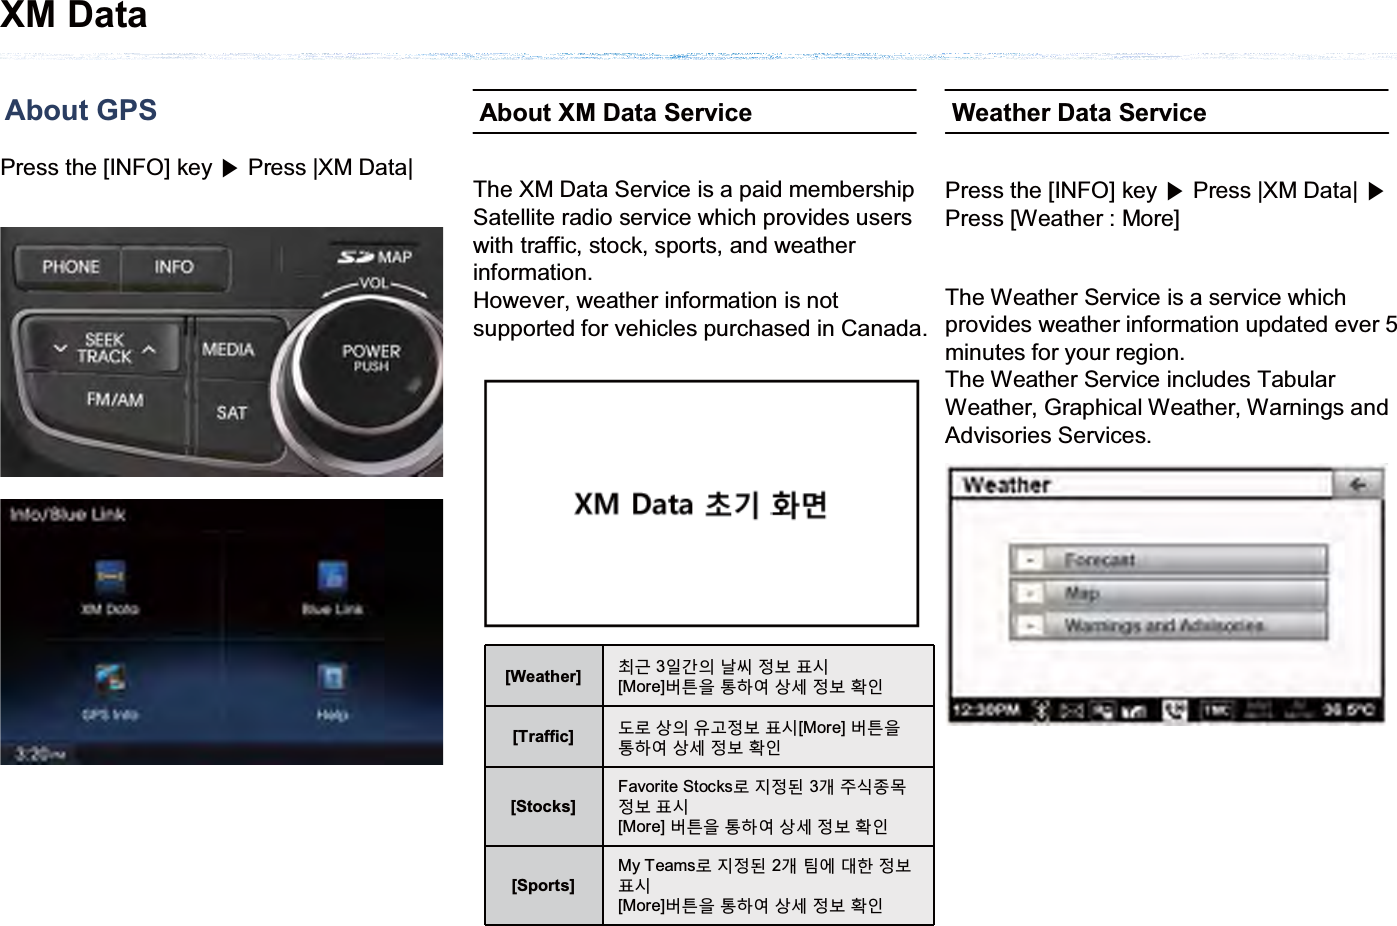 XM DataAbout GPSPress the [INFO] key ೛Press |XM Data| About XM Data ServiceThe XM Data Service is a paid membershipSatellite radio service which provides users with traffic, stock, sports, and weather information.However, weather information is not supported for vehicles purchased in Canada.[Weather] ফ̒ 3ࢊɾࢂΤ޽ࢽؿ૲ݤ[More]؟ટࡶ ੼ଜࠆ ۘۿ ࢽؿ ୙ࢉ[Traffic] ѦԻ ۘࢂ ࡪˈࢽؿ ૲ݤ[More] ؟ટࡶ੼ଜࠆ ۘۿ ࢽؿ ୙ࢉ[Stocks]Favorite StocksԻ एࢽѹ 3ʎ ࣯ݥּࣗࢽؿ ૲ݤ[More] ؟ટࡶ ੼ଜࠆ ۘۿ ࢽؿ ୙ࢉ[Sports]My TeamsԻ एࢽѹ 2ʎય߾оଞࢽؿ૲ݤ[More]؟ટࡶ ੼ଜࠆ ۘۿ ࢽؿ ୙ࢉWeather Data ServiceThe Weather Service is a service which provides weather information updated ever 5 minutes for your region.The Weather Service includes Tabular Weather, Graphical Weather, Warnings and Advisories Services. Press the [INFO] key ೛Press |XM Data| ೛Press [Weather : More] 